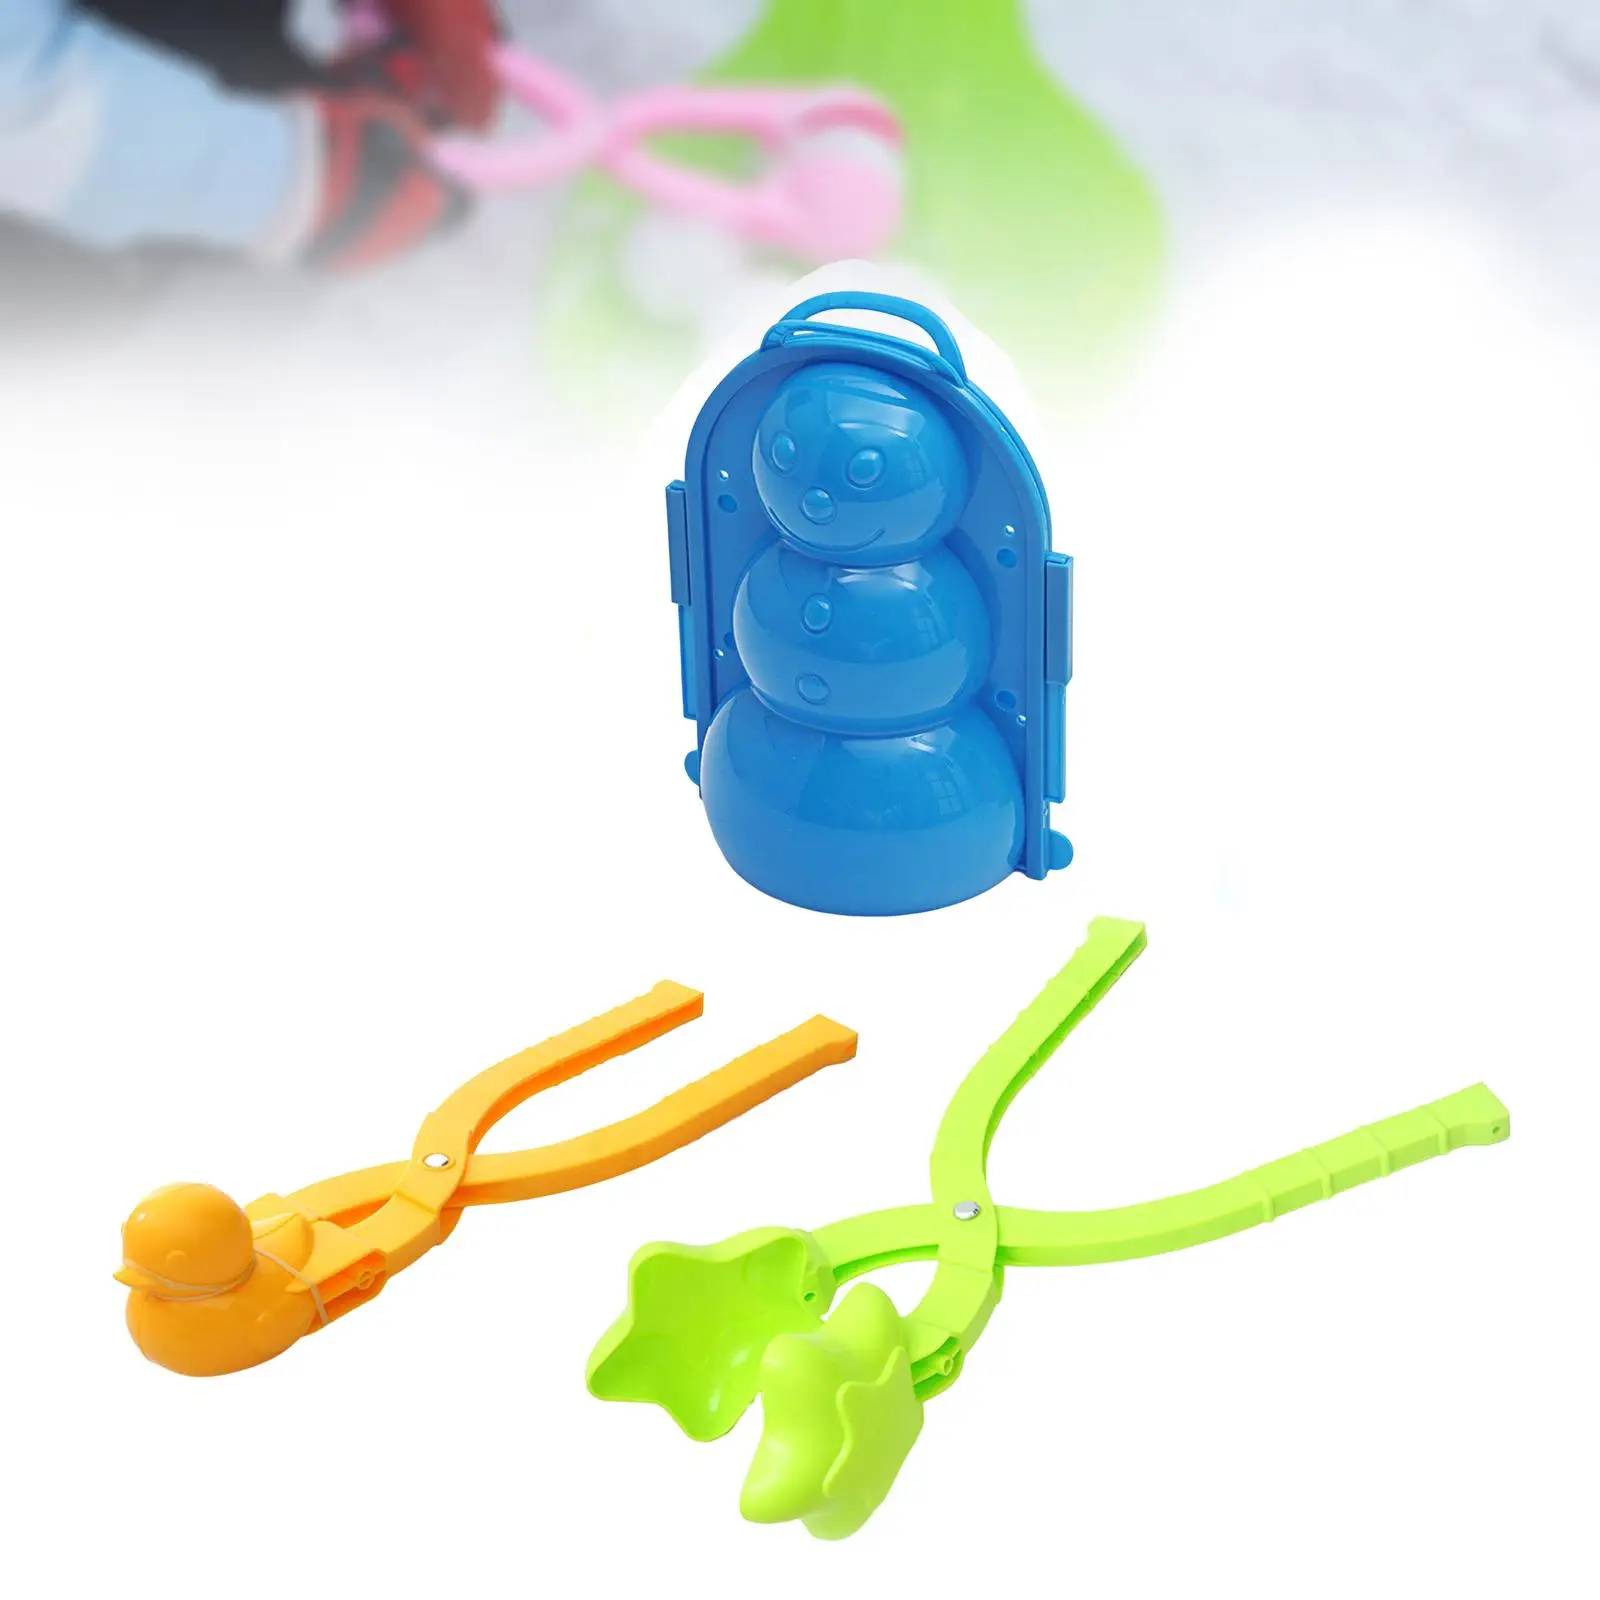 Portable Snowball Clamp Wear Resistant Practical Gifts Adorable Snow Ball Making Tools for Outdoor Games Winter Girls Boys